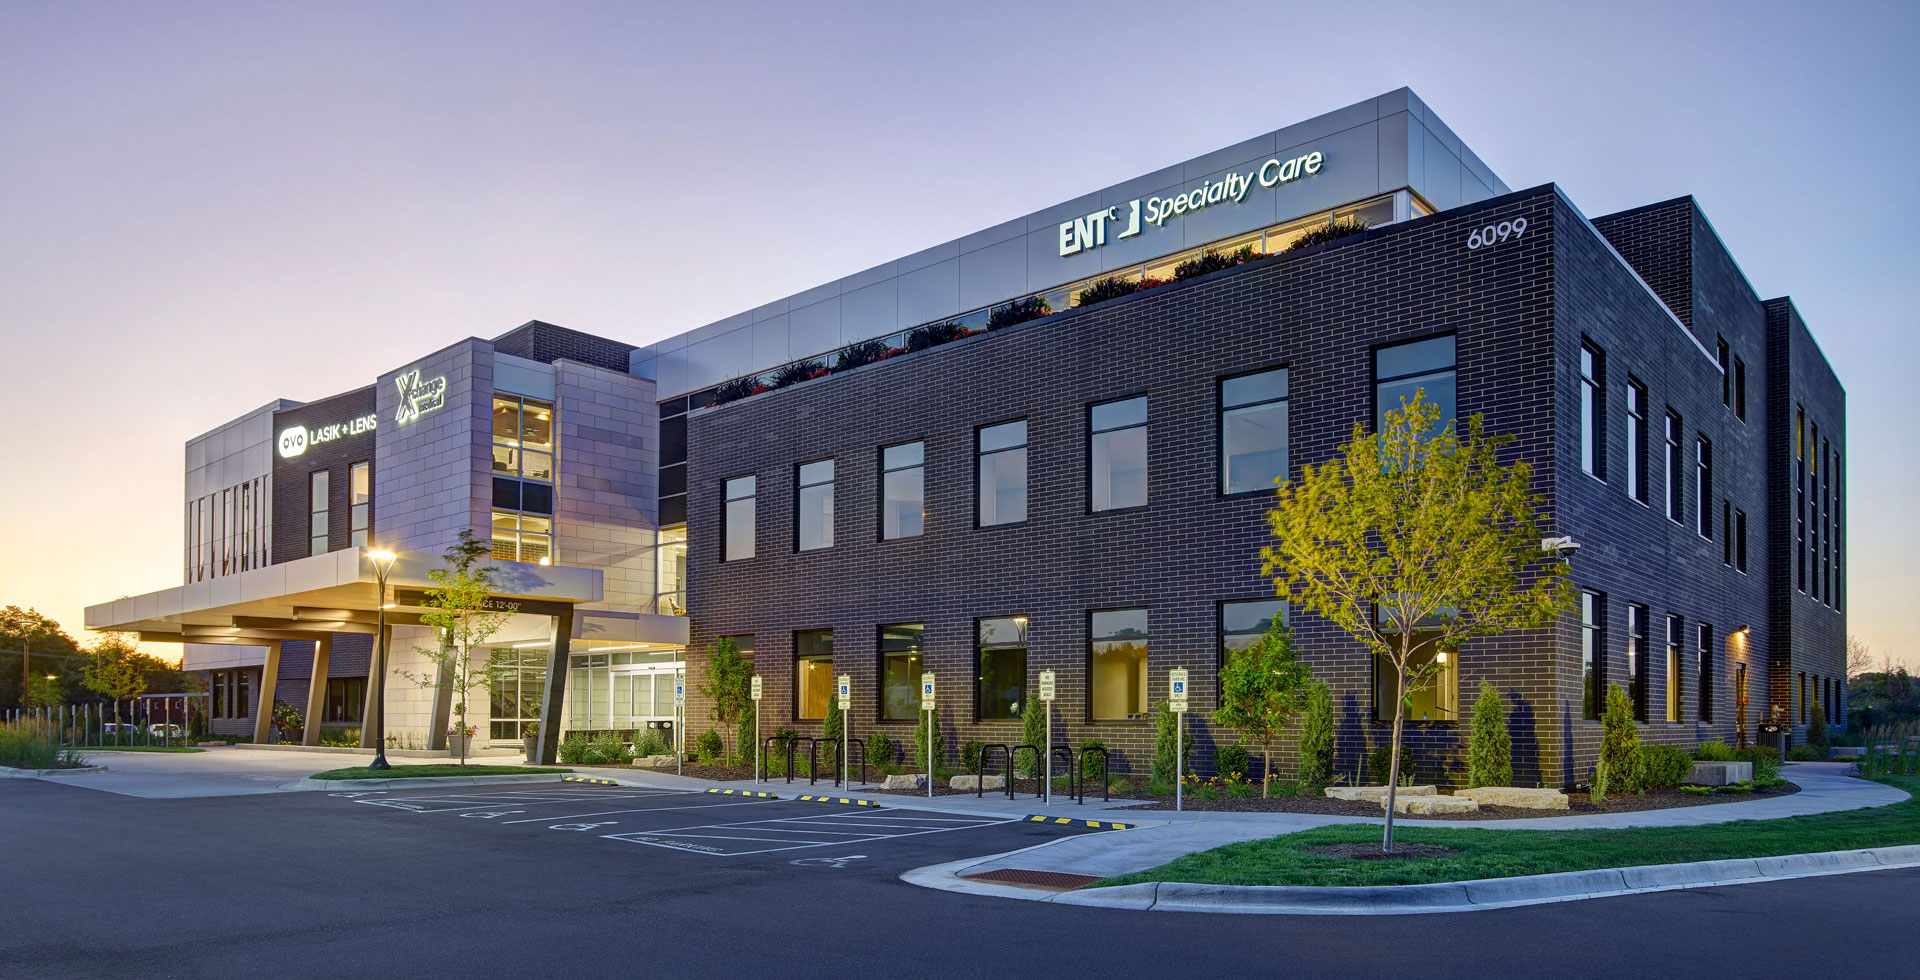 Outside view at dusk of the ENT Specialty Care building by Davis Group.